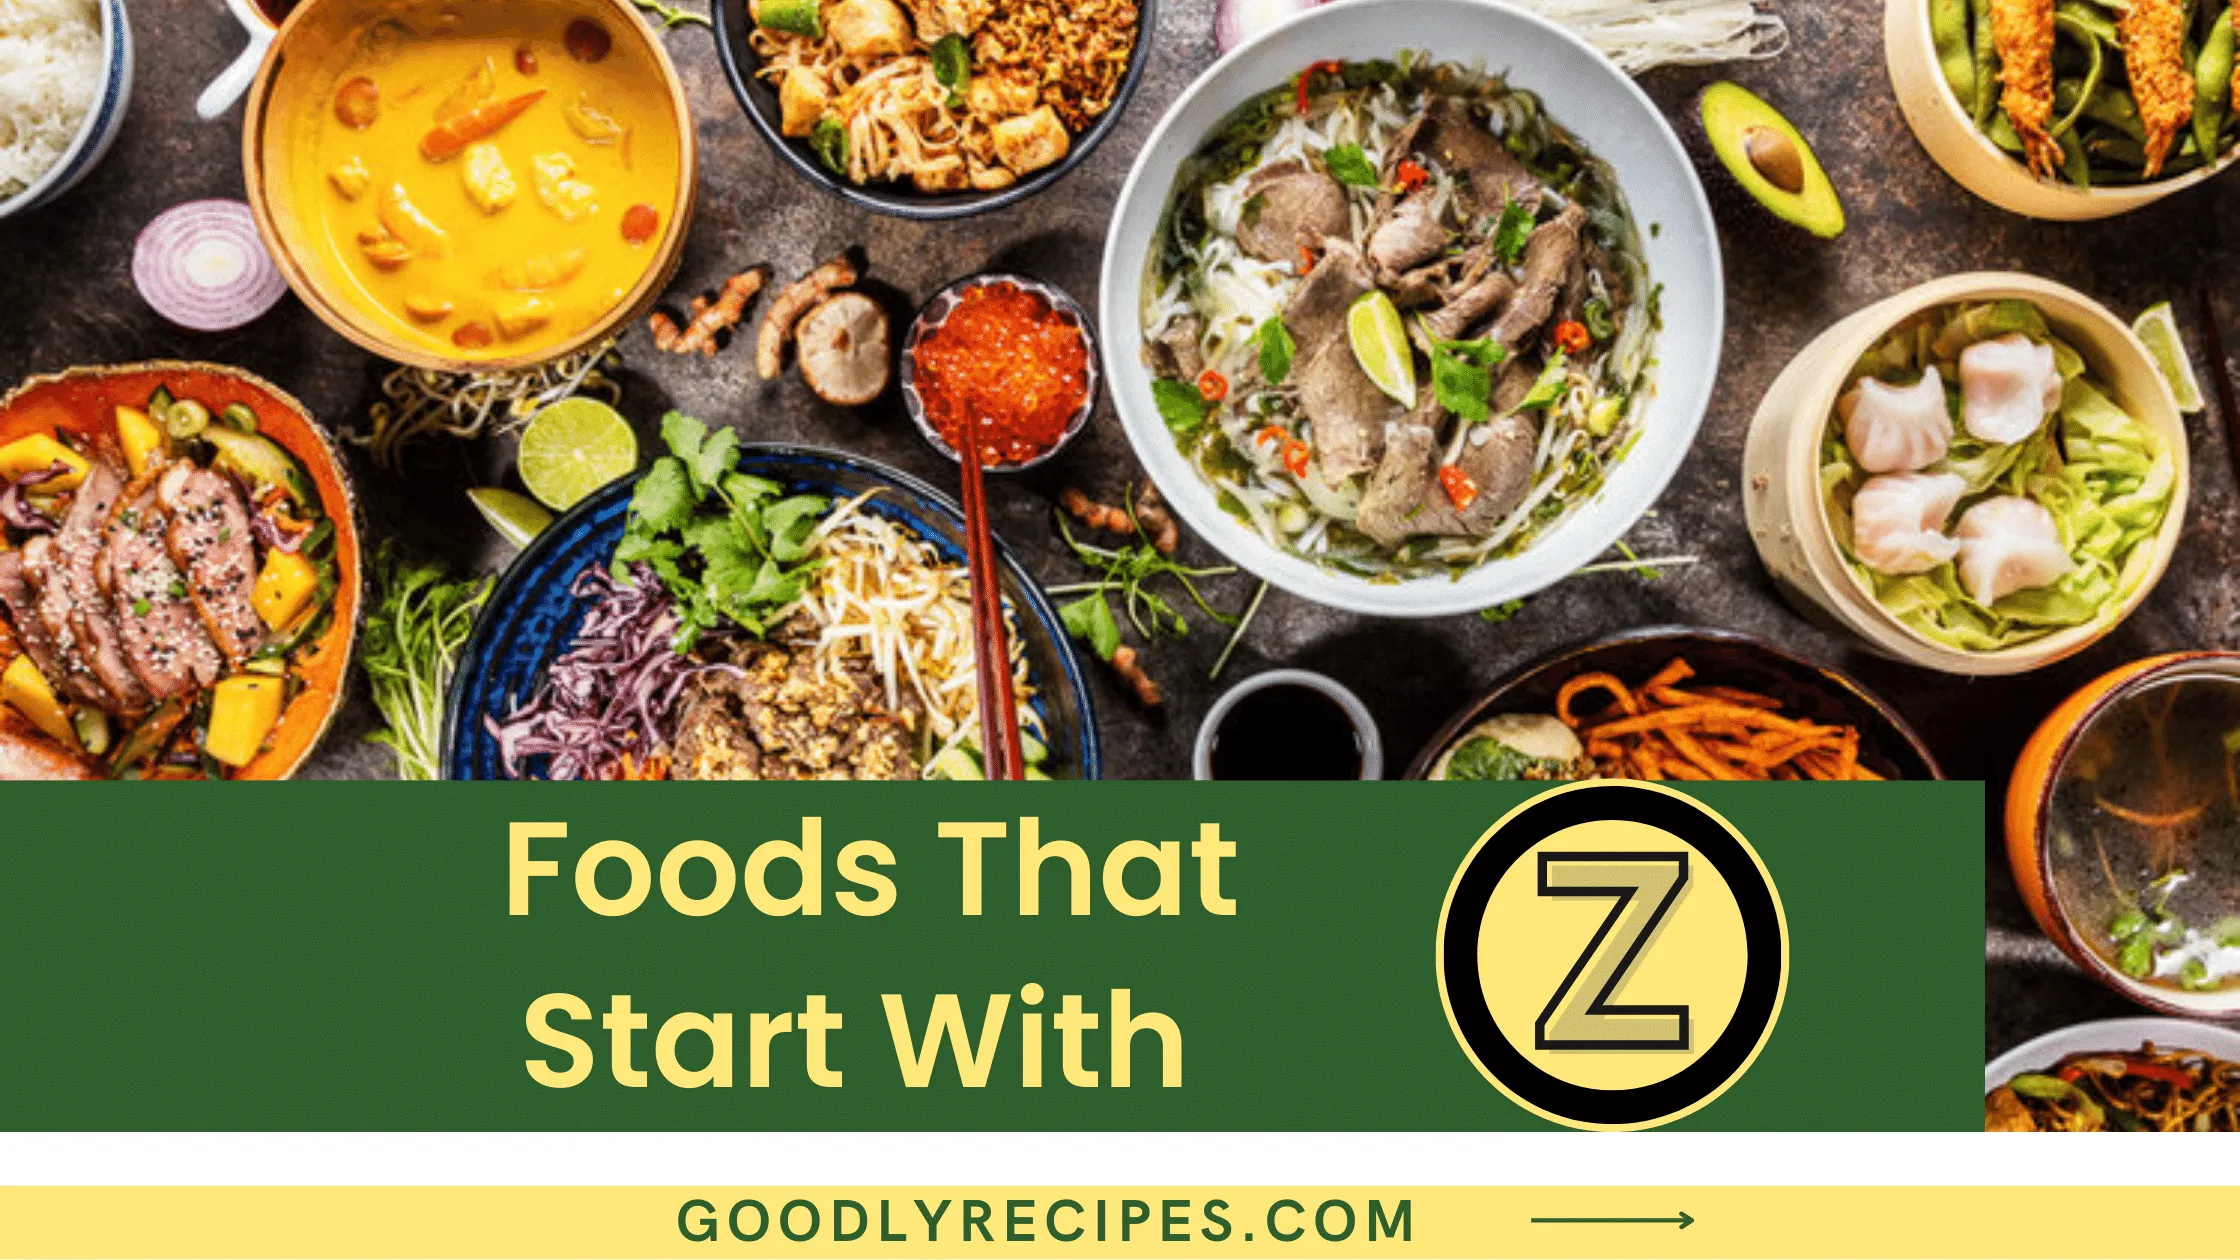 Foods That Start With Z - Special Dishes